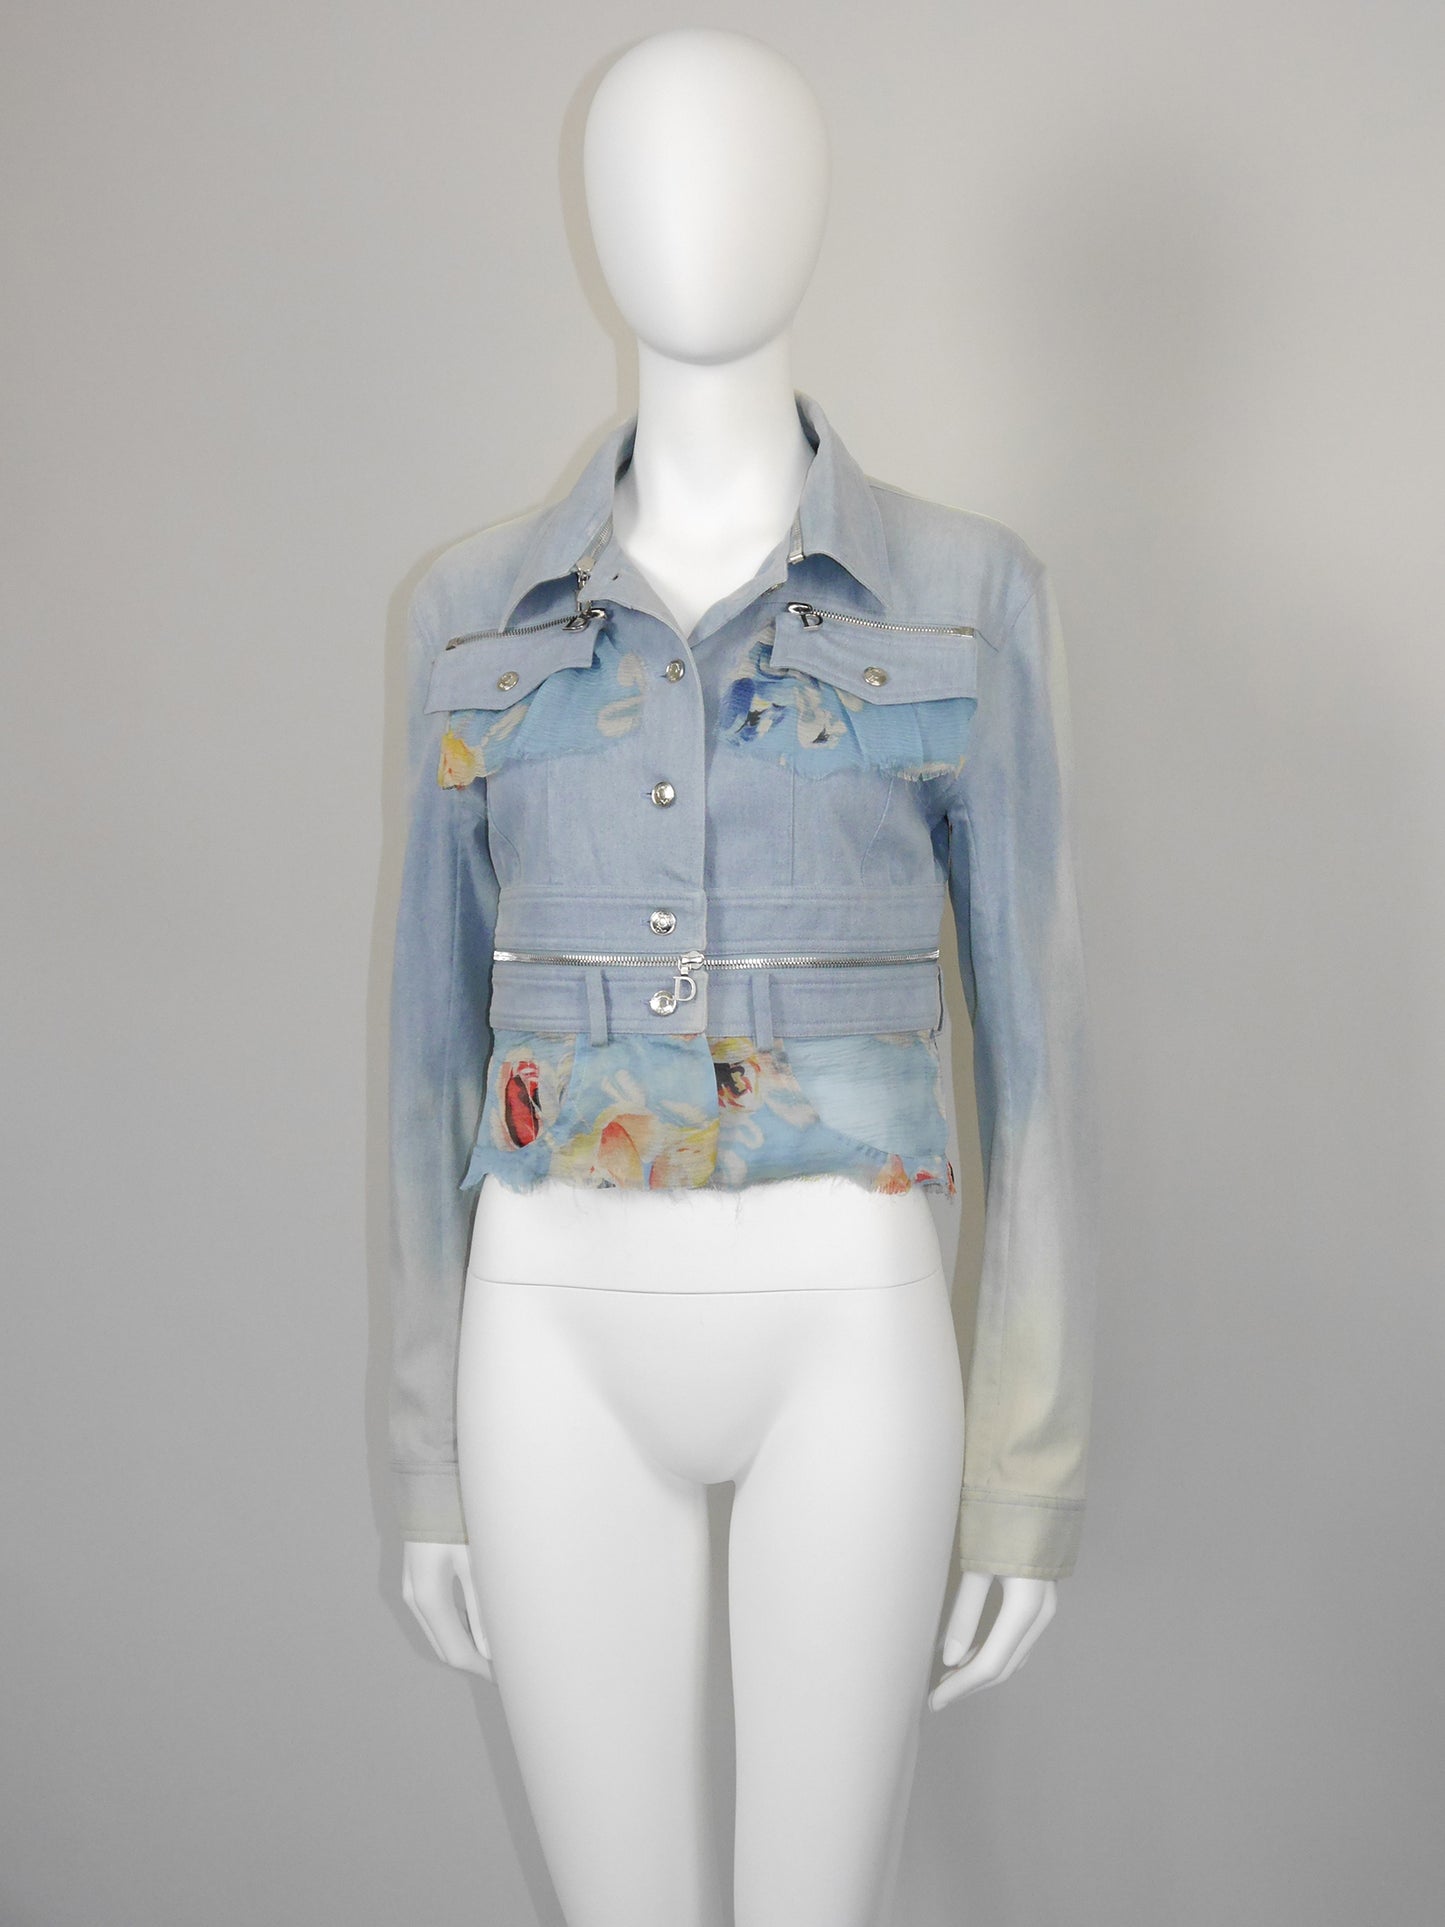 CHRISTIAN DIOR by John Galliano Spring 2001 Vintage Convertible Denim Jacket w/ Logo Zippers Size M